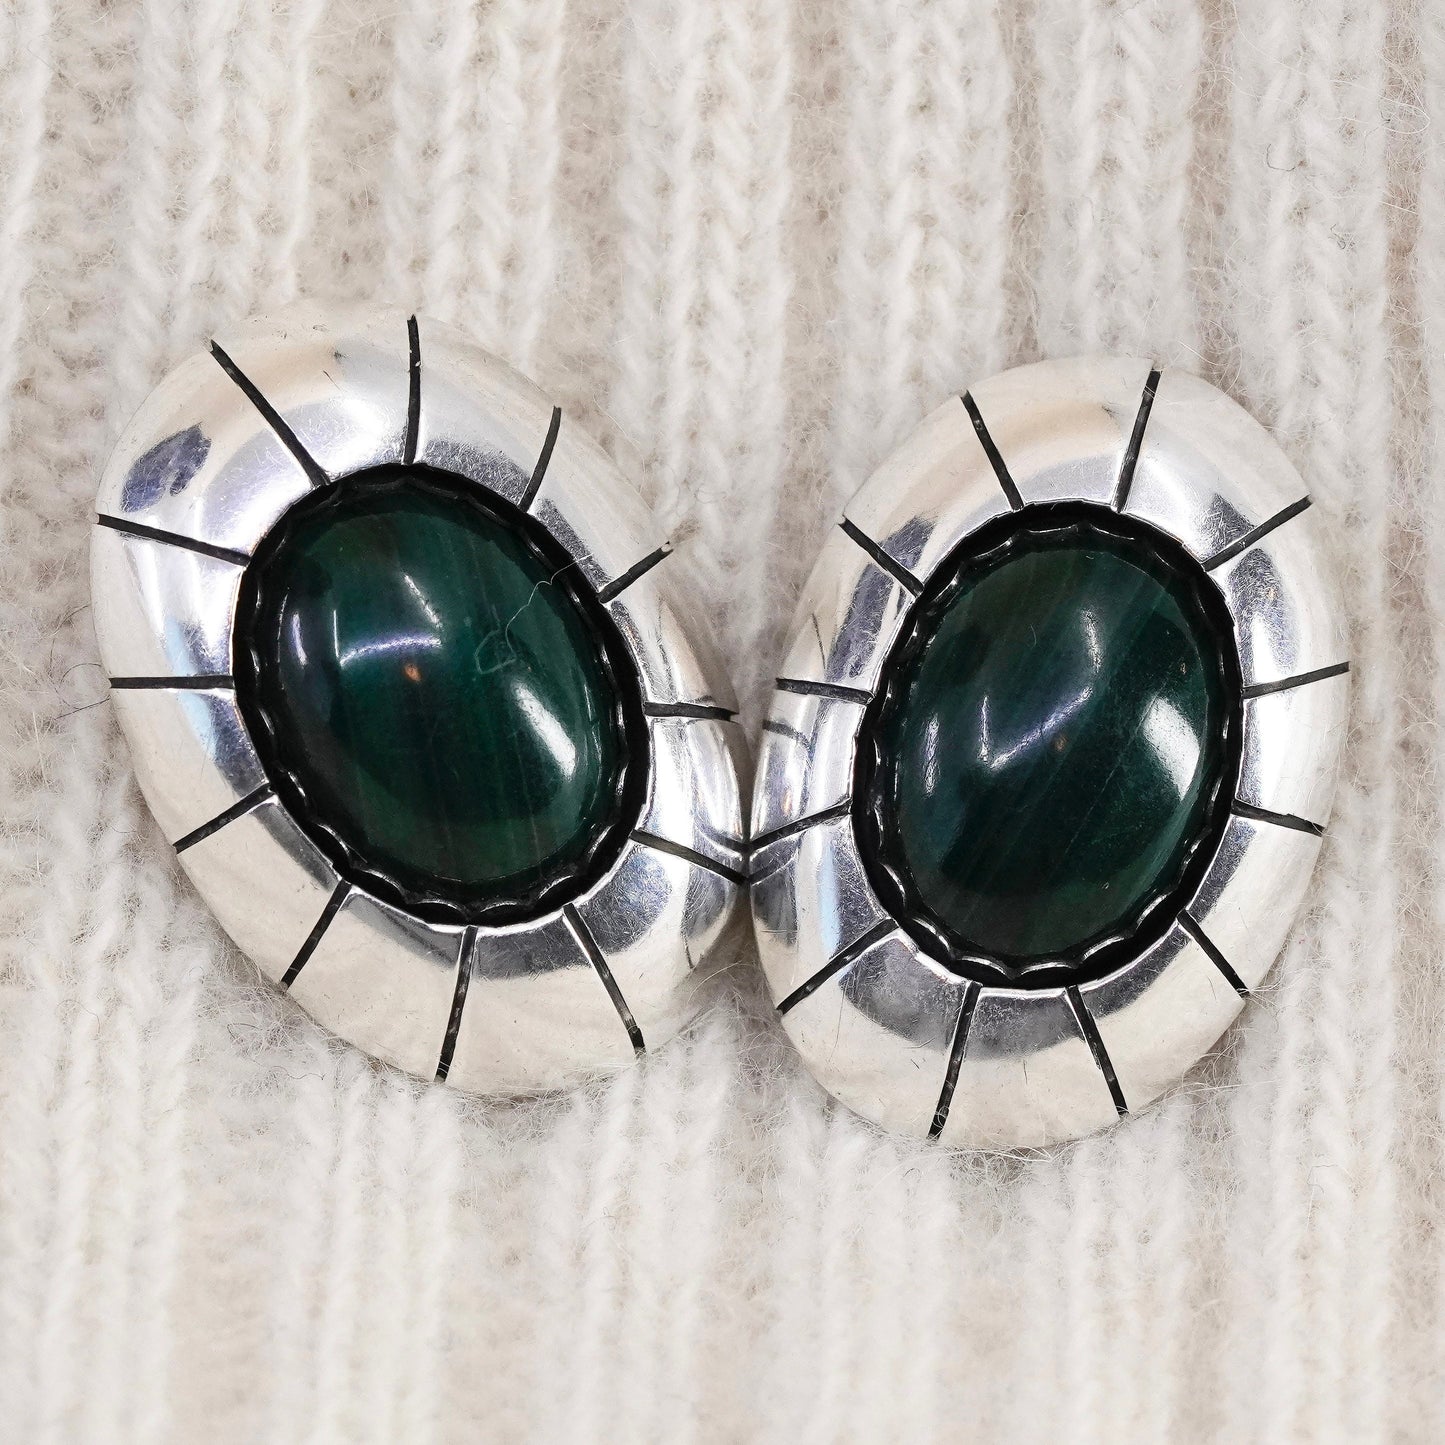 vtg Sterling 925 silver Carolyn Pollack Relios earrings, oval studs malachite